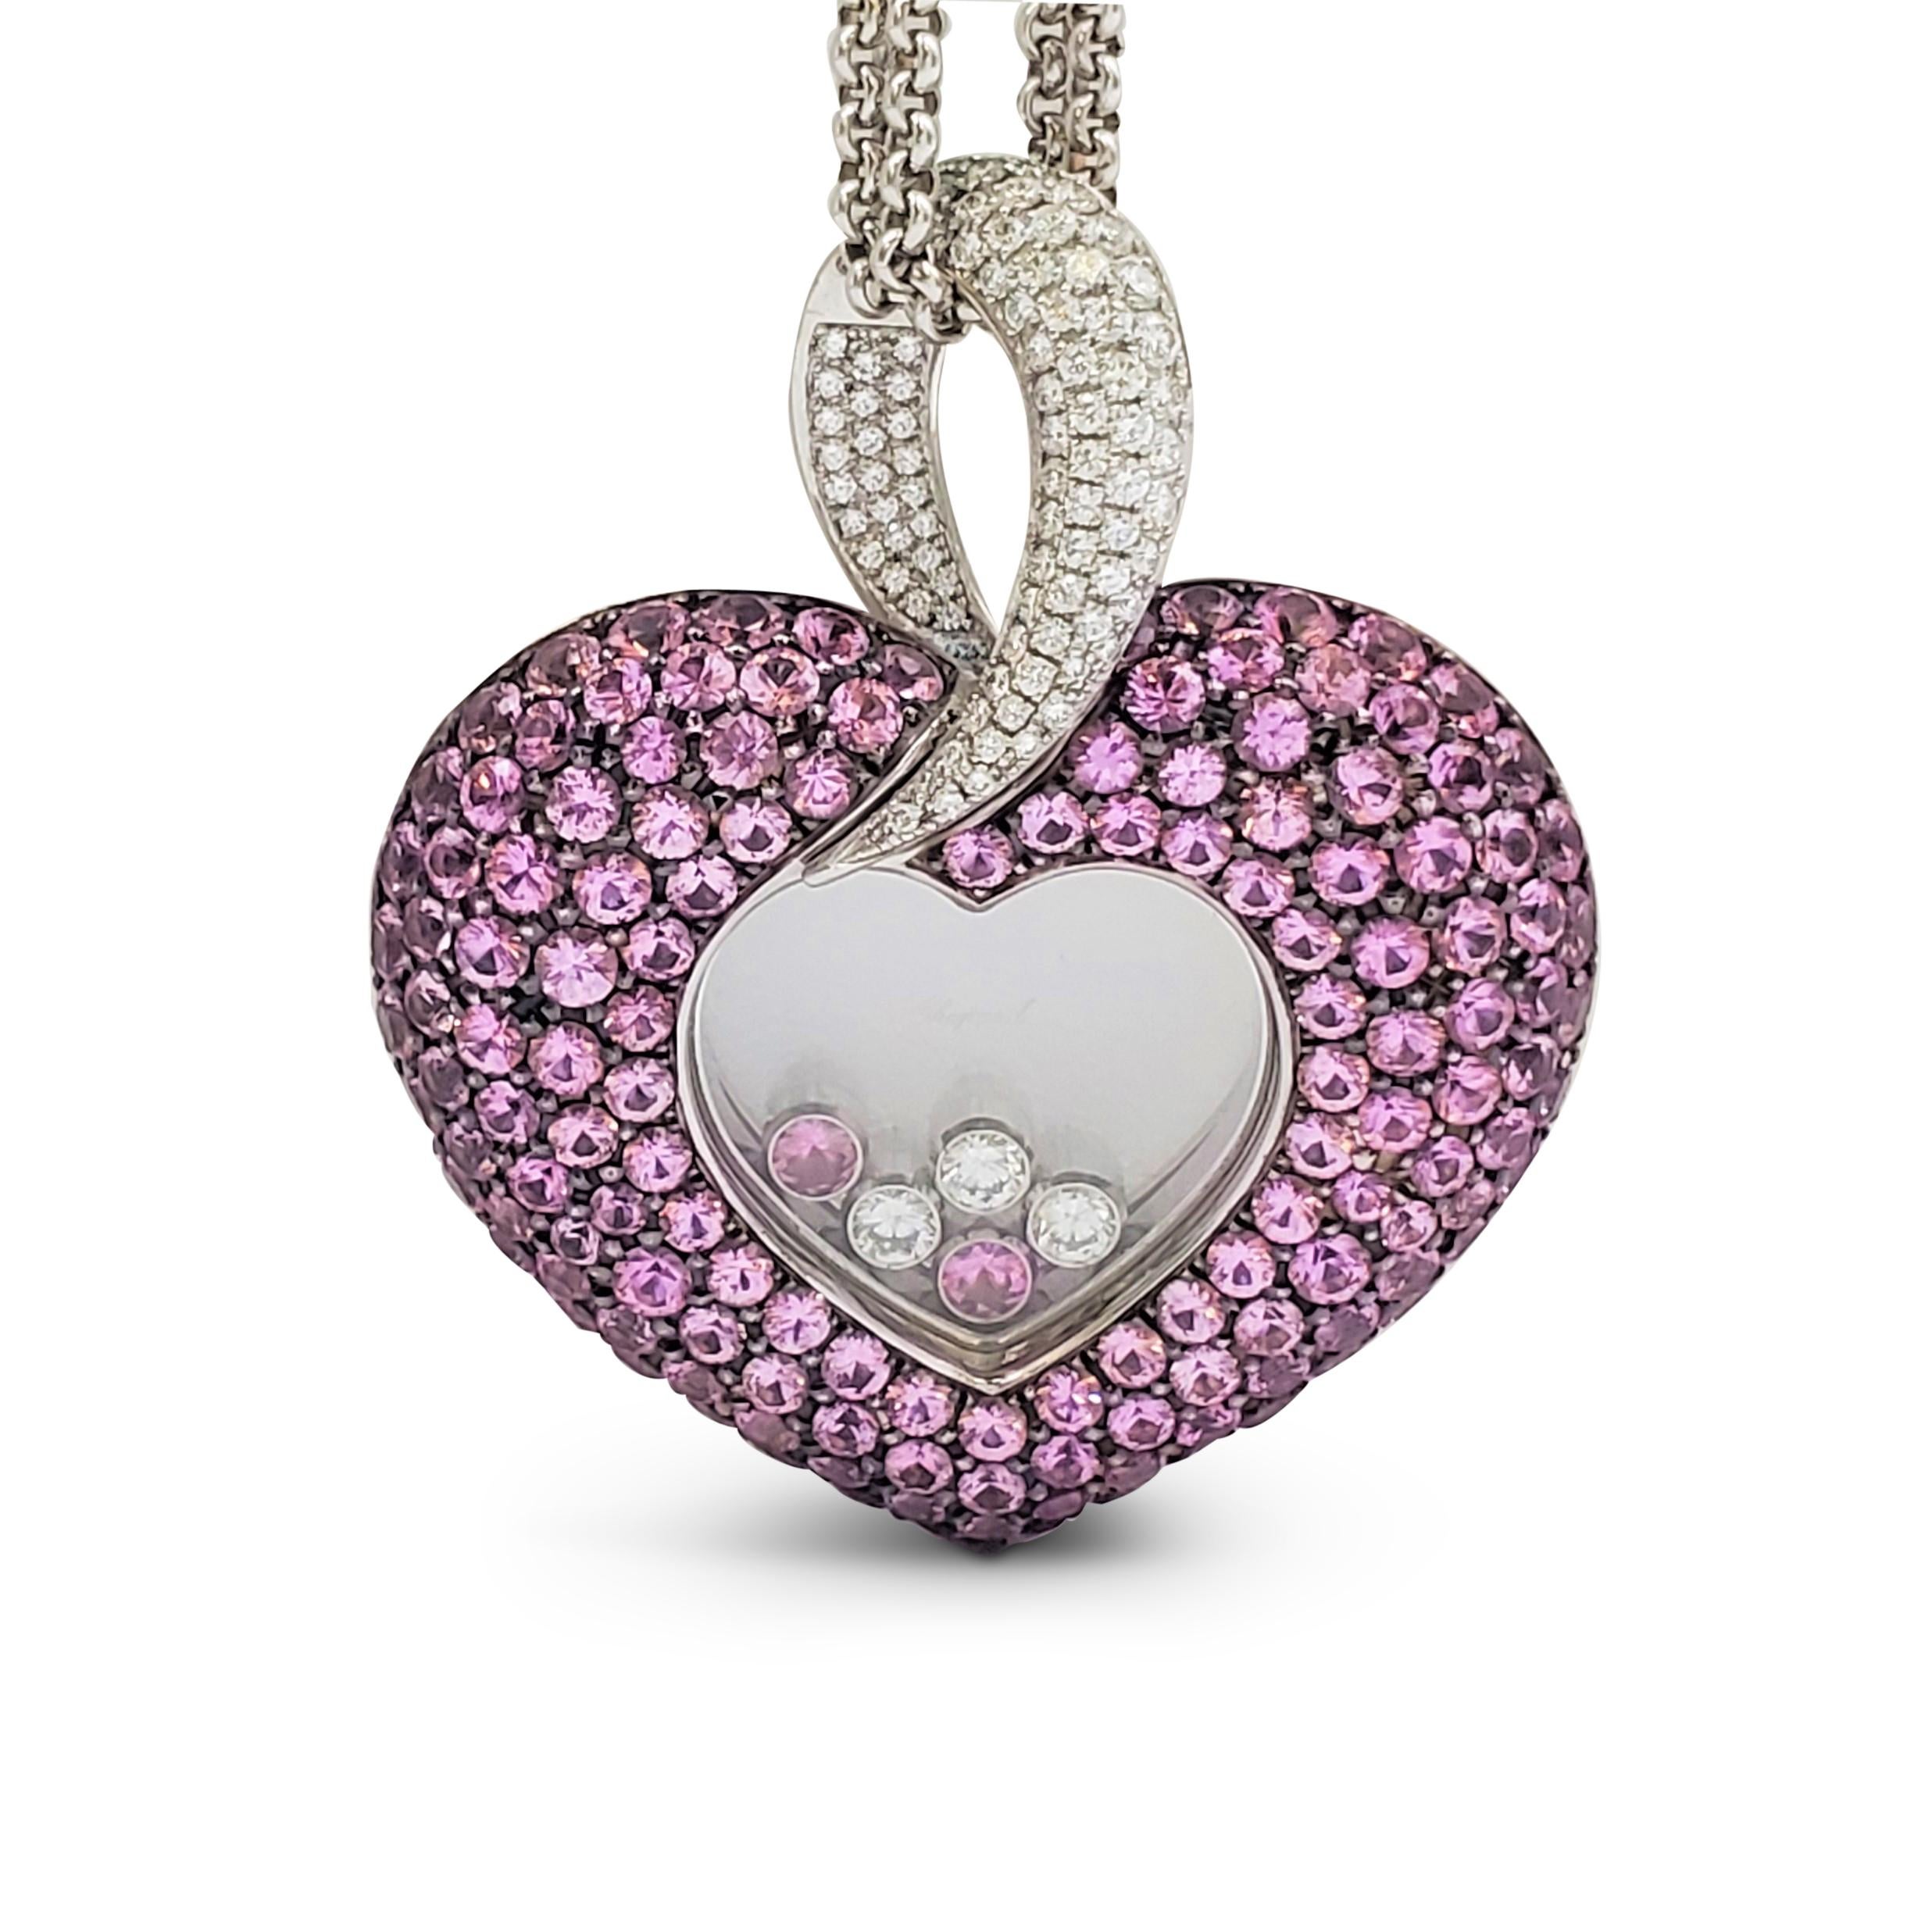 Authentic delightful Chopard 'Happy Diamond' heart-shaped pendant necklace crafted in 18 karat white gold. The puffed pendant is set with gemmy pink sapphires and sparkling pave set round brilliant cut diamonds at the bail. Three floating diamonds